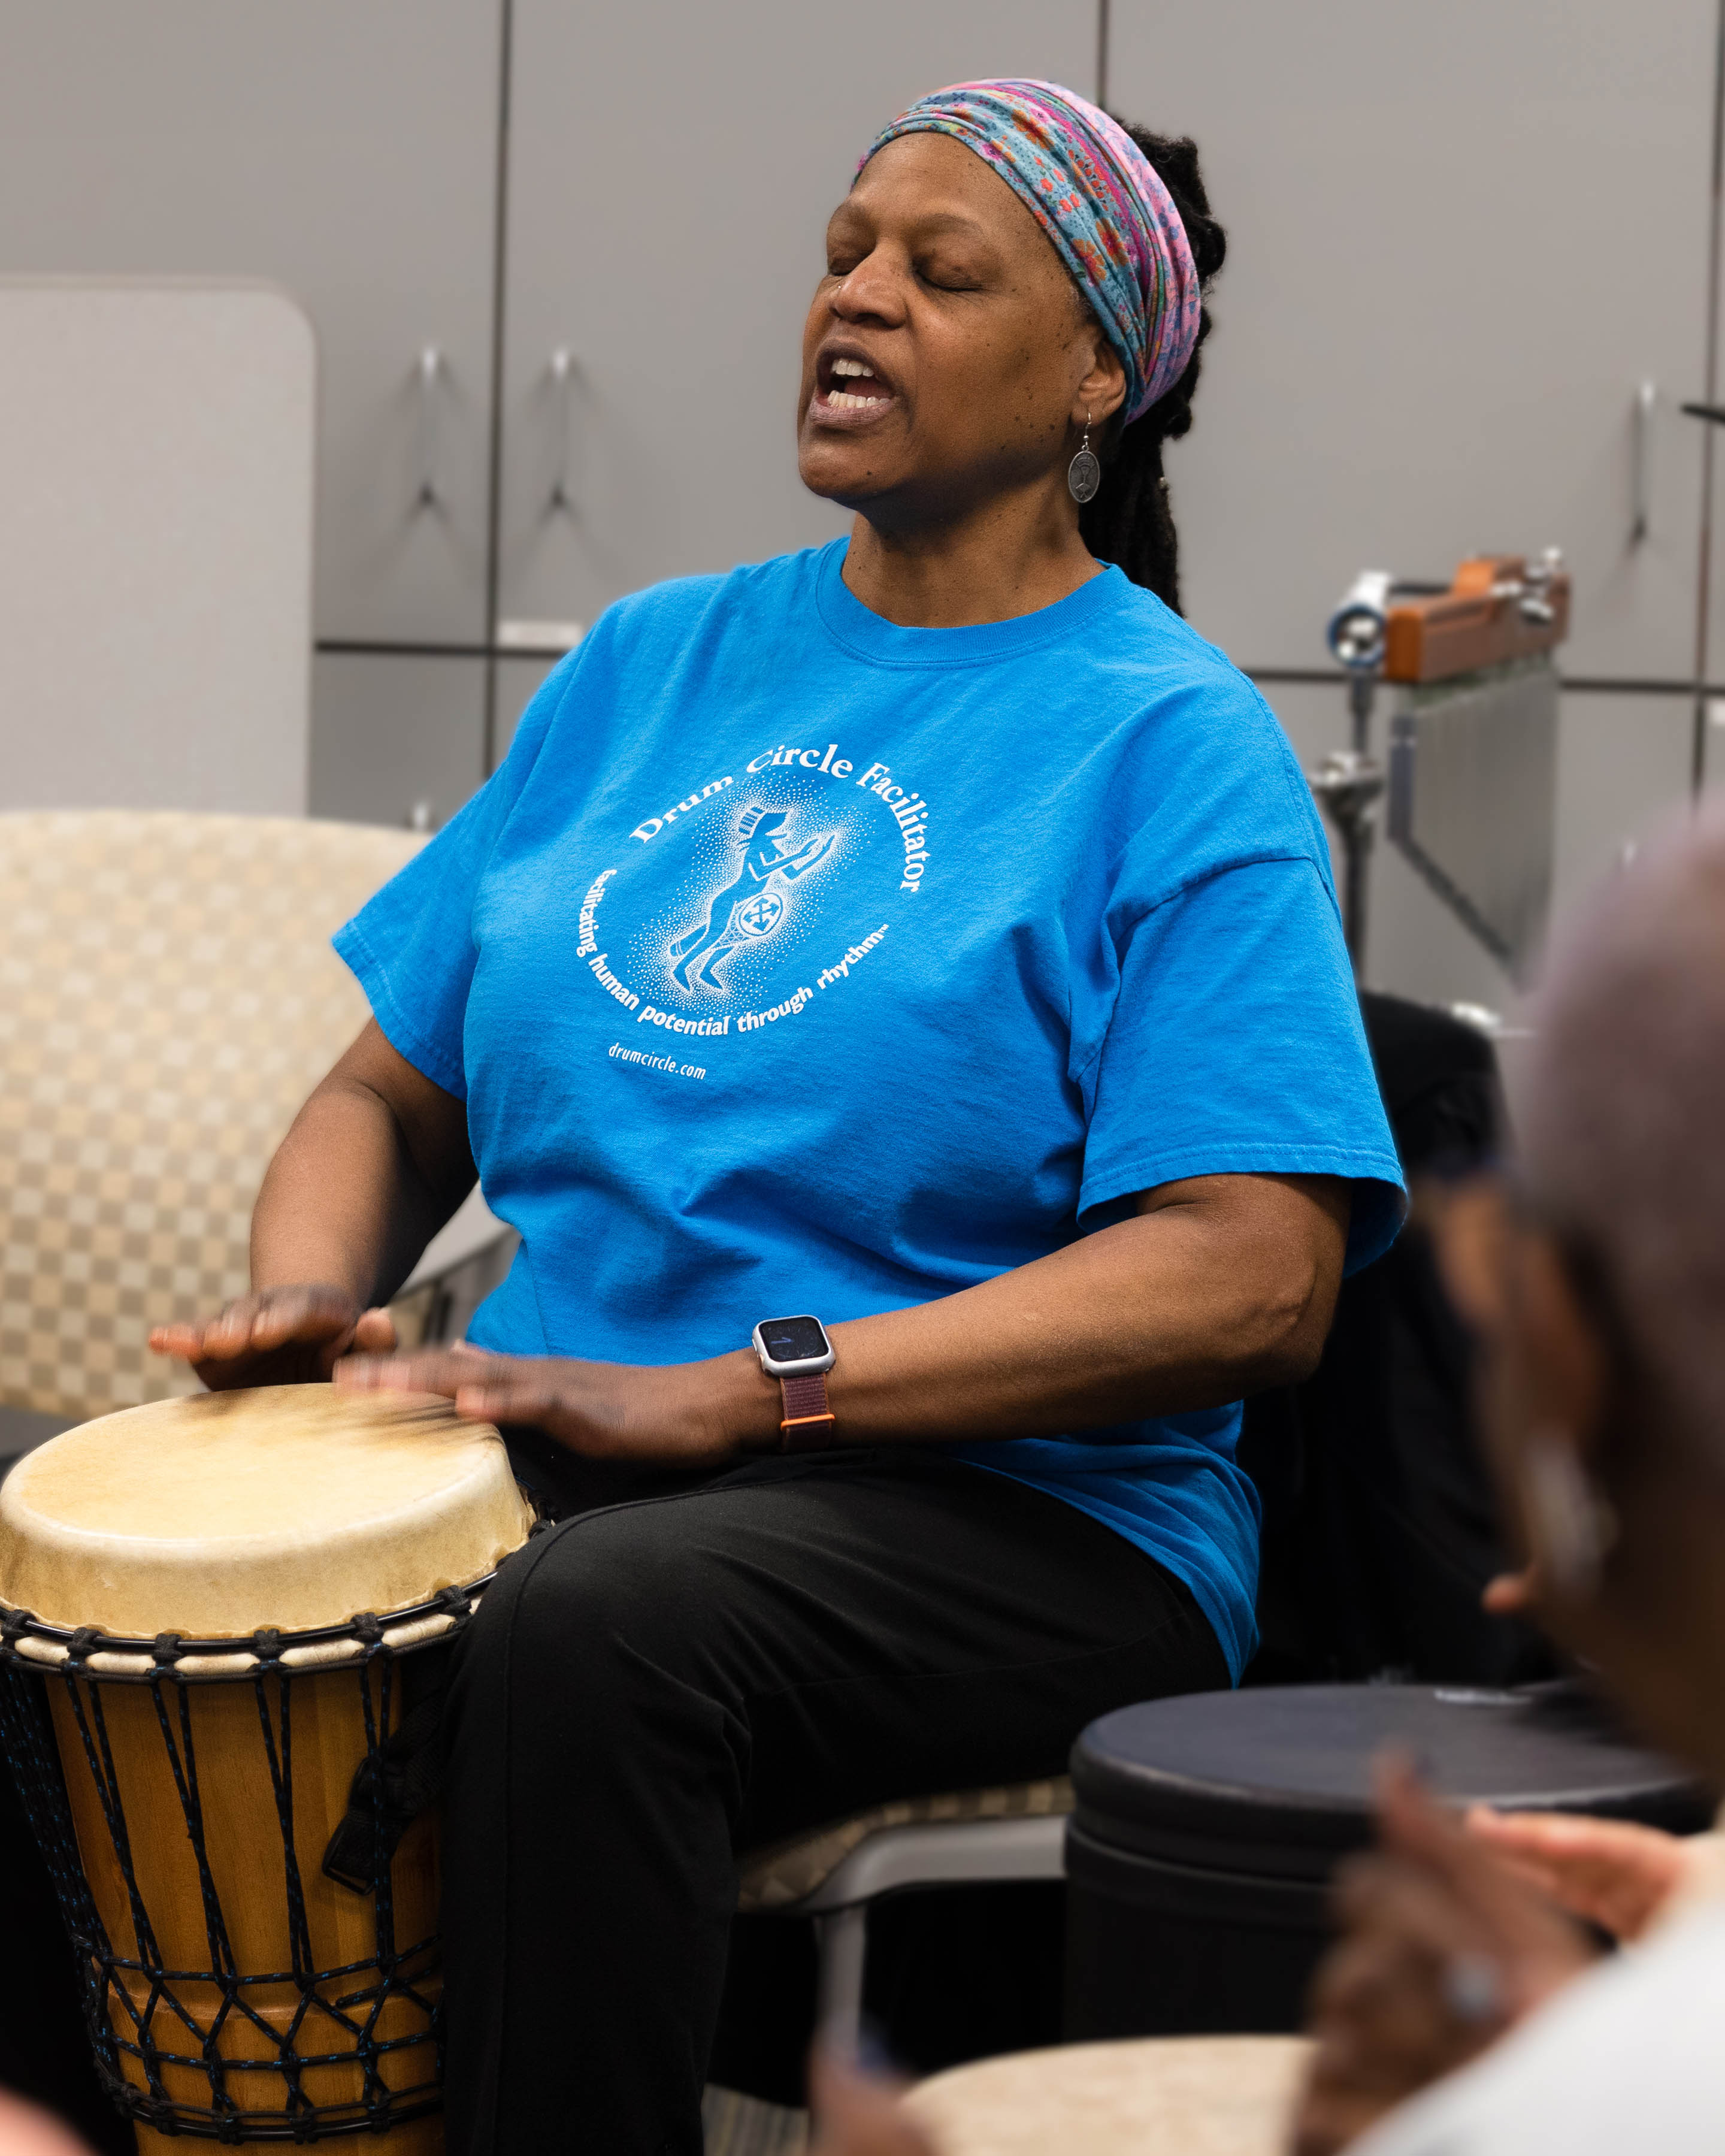 gail jackson singing in chair and playing drum